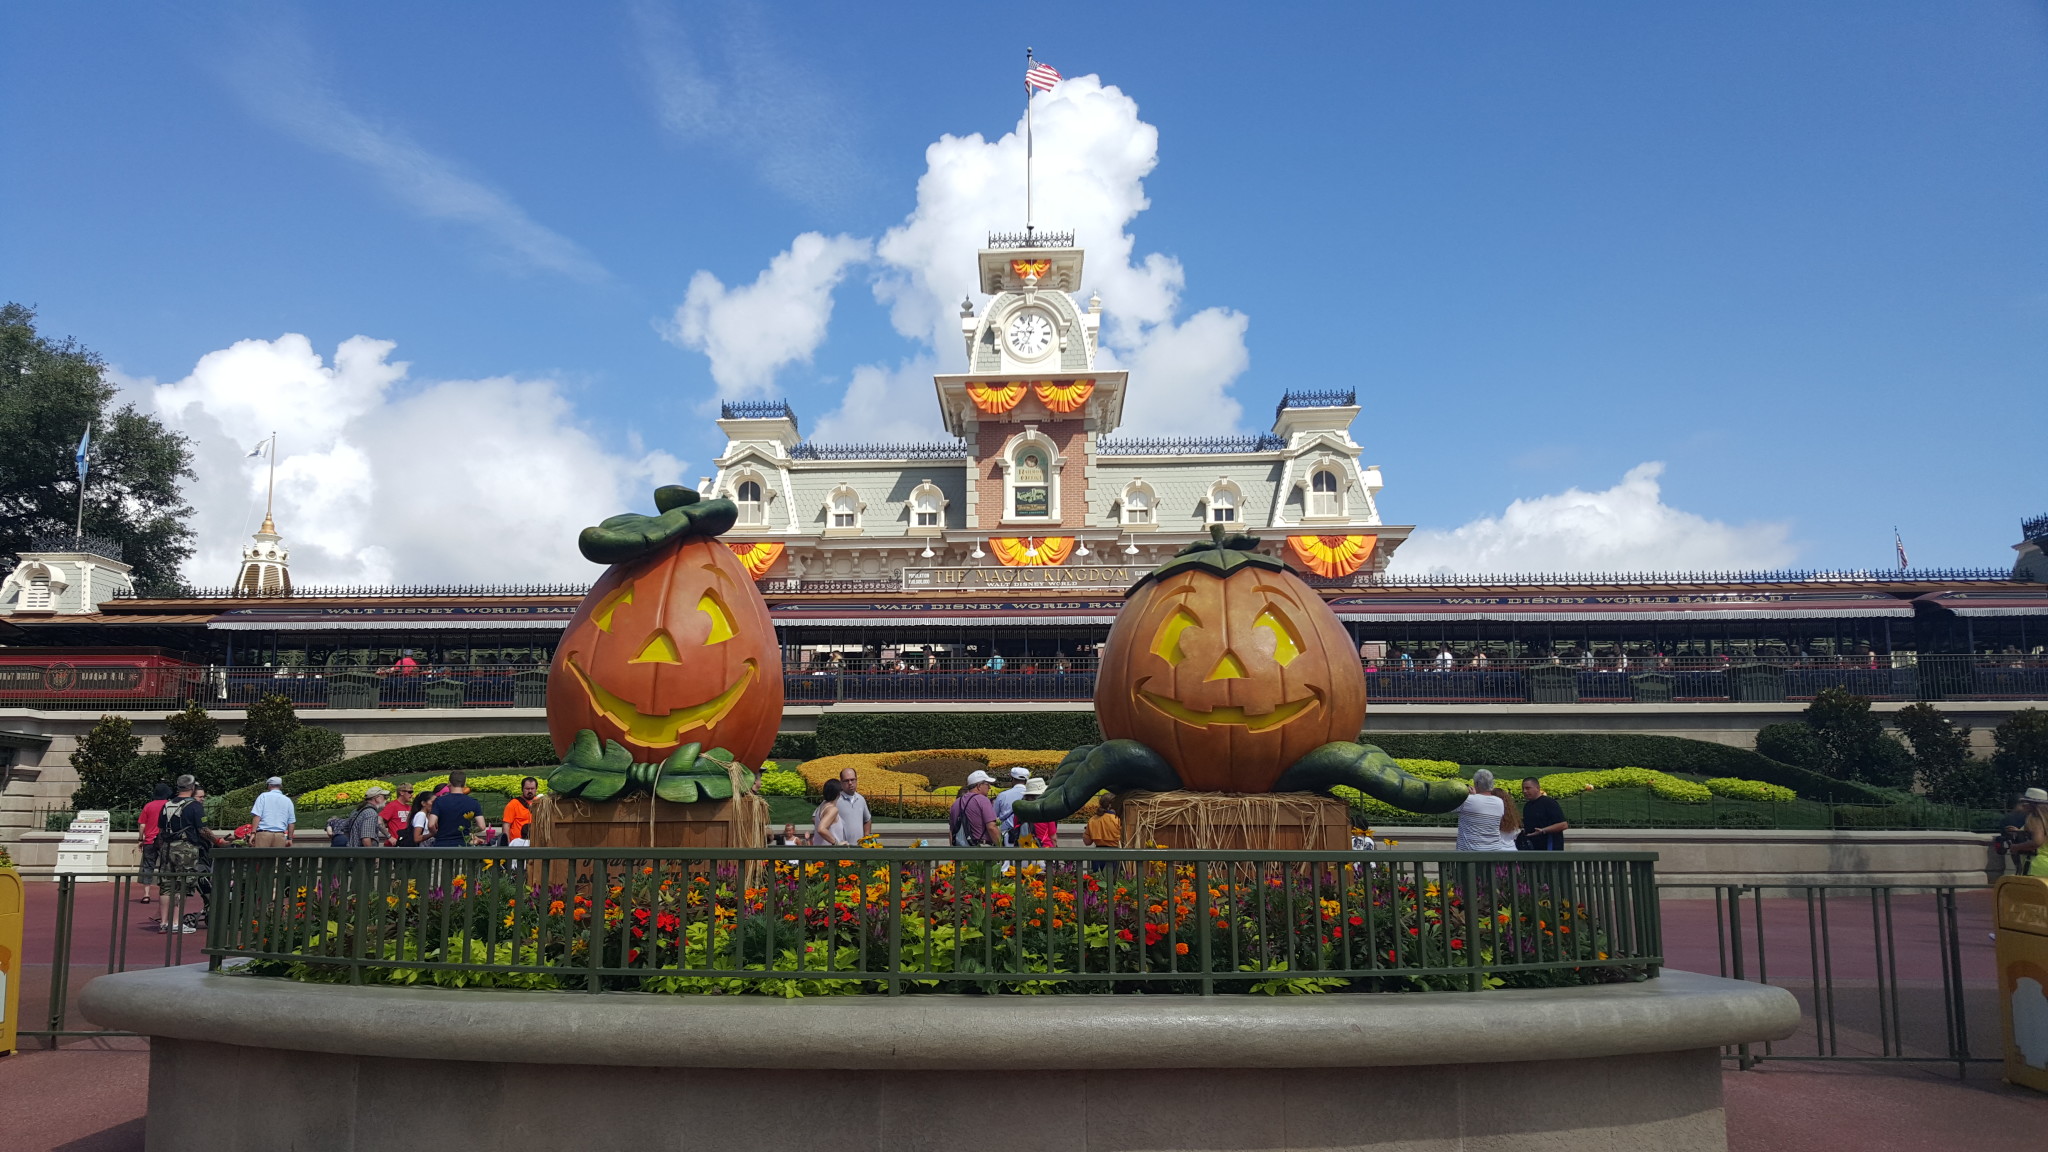 Top 5 rookie mistakes when visiting a Disney Theme Park